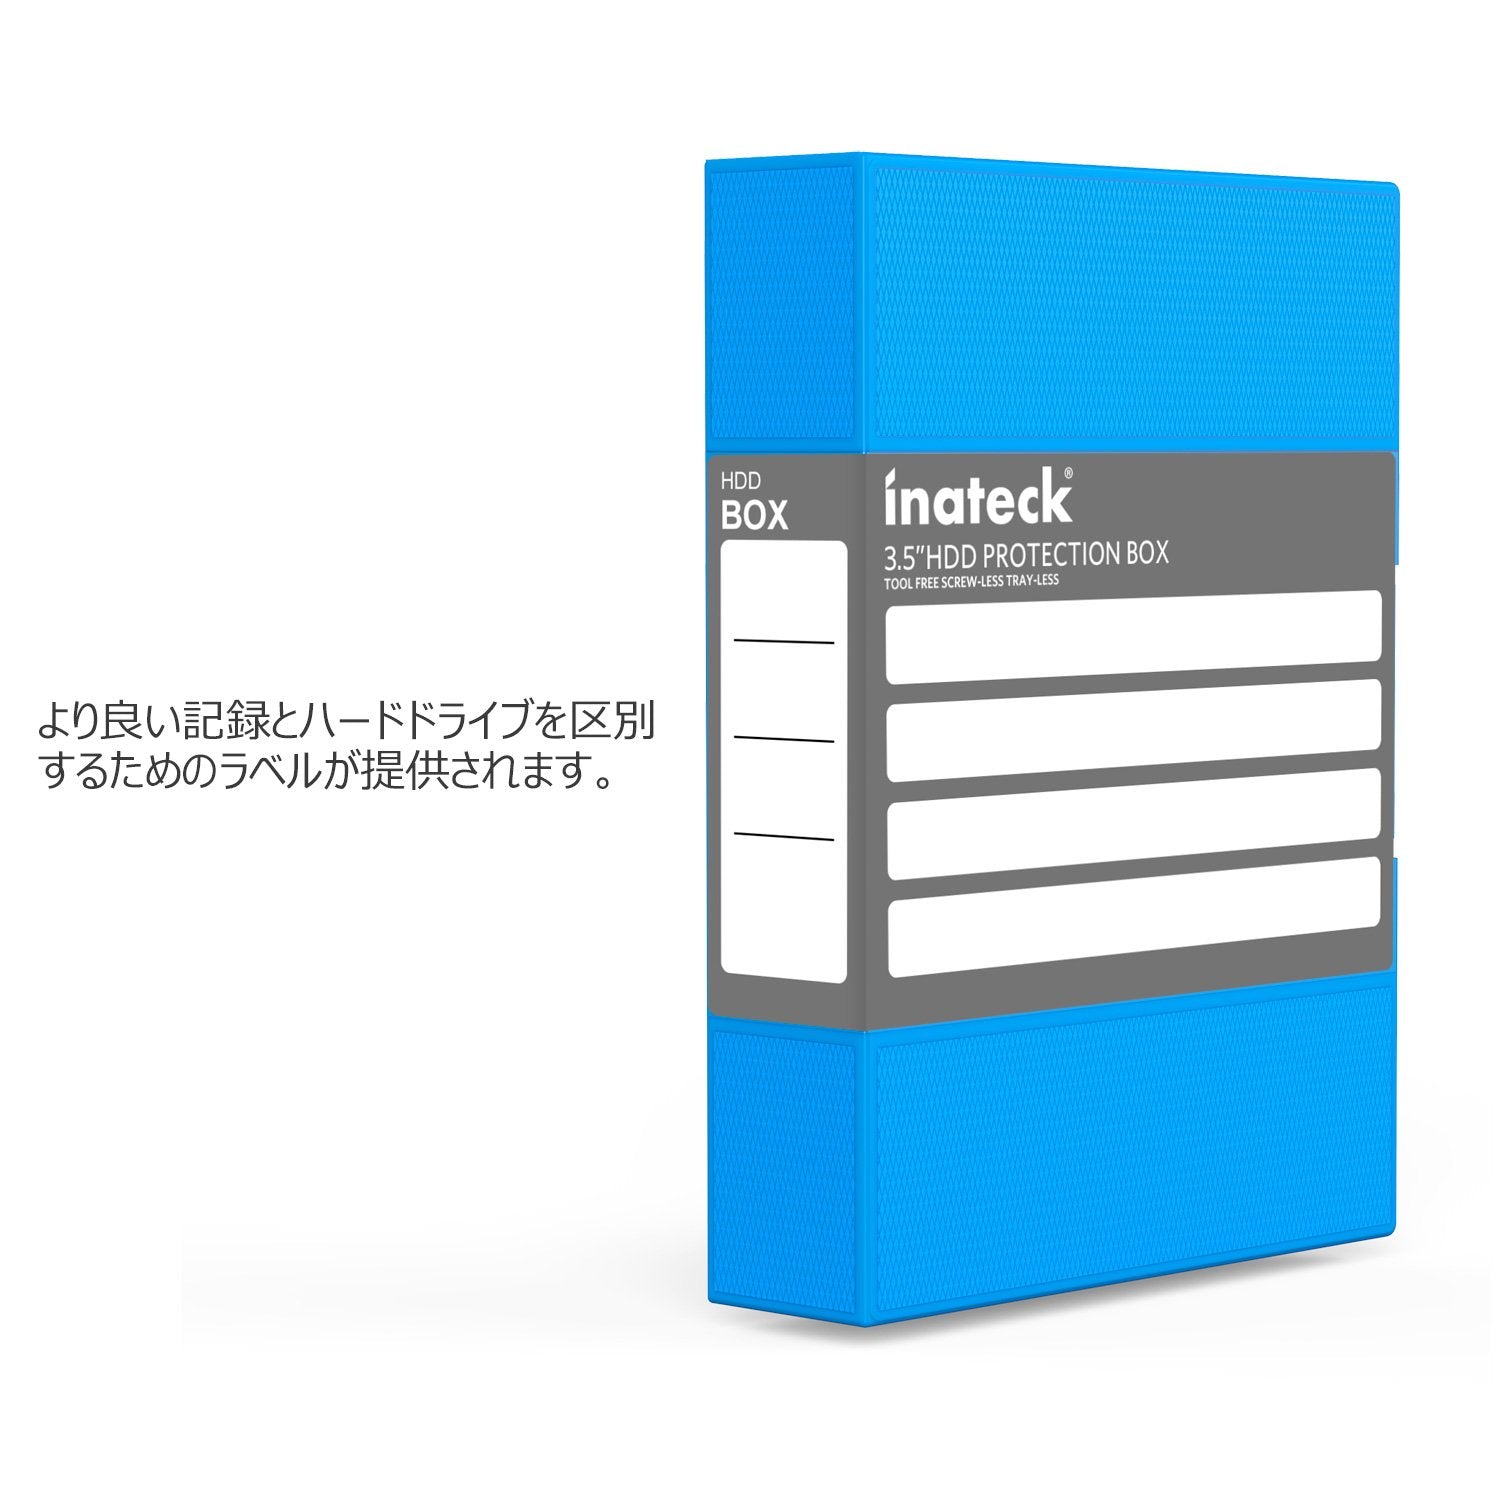 Inateck HPF-6-pack blue - Inateckバックパックジャパン